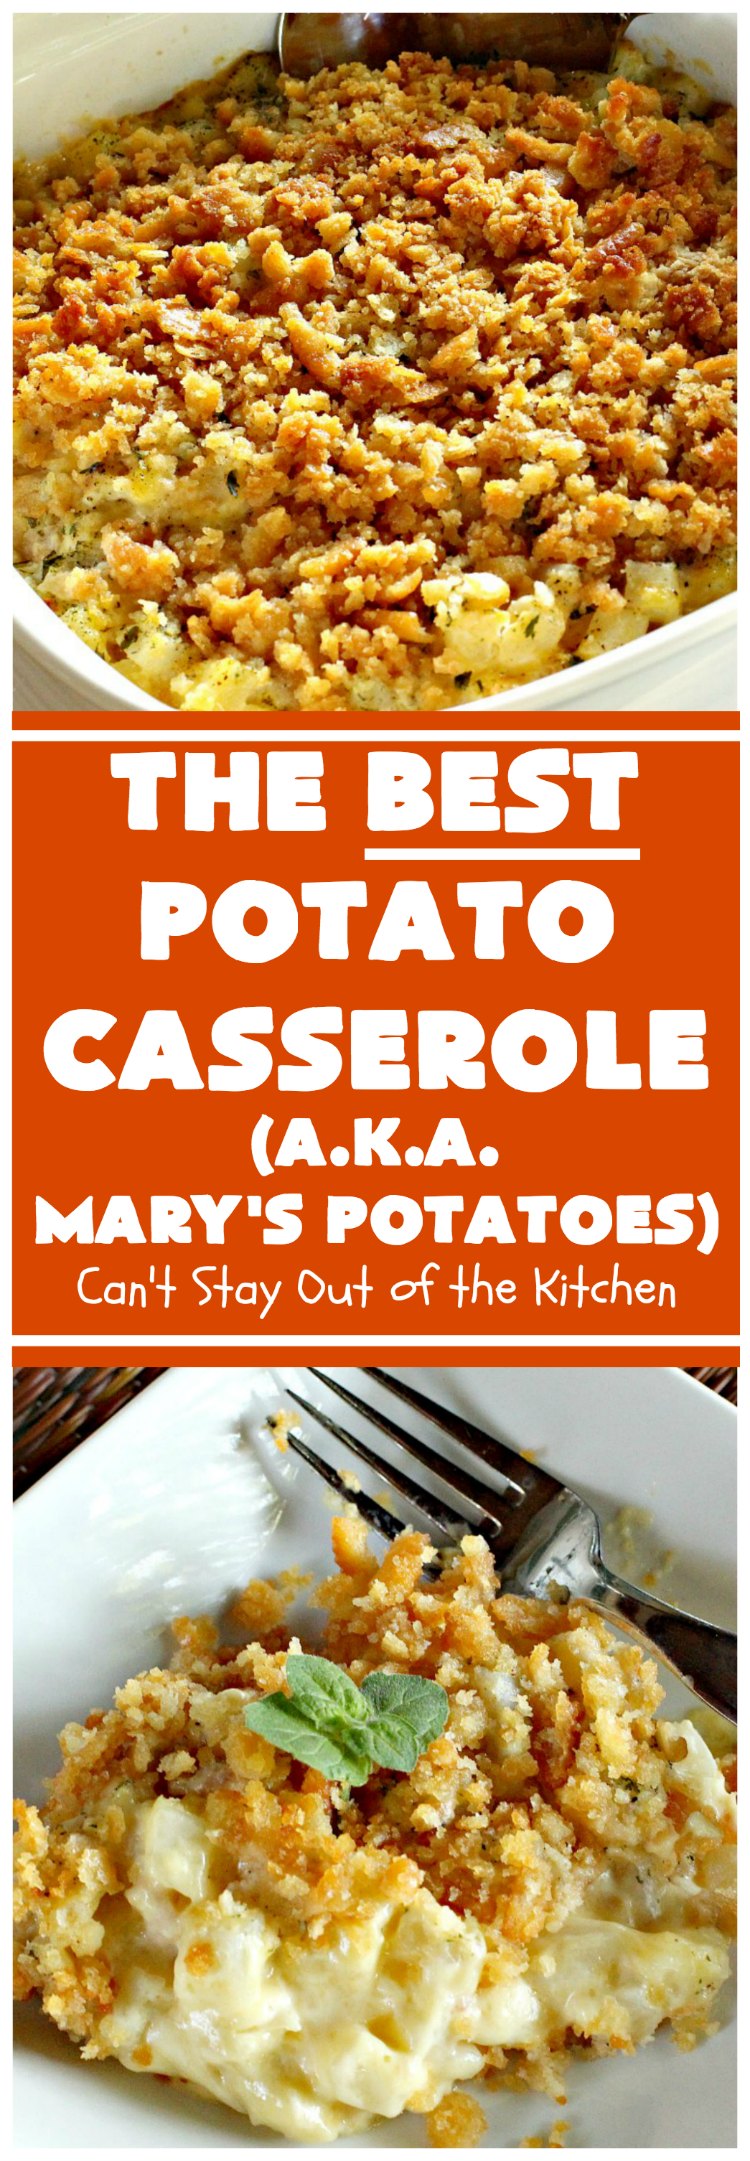 The Best Potato Casserole | Can't Stay Out of the Kitchen